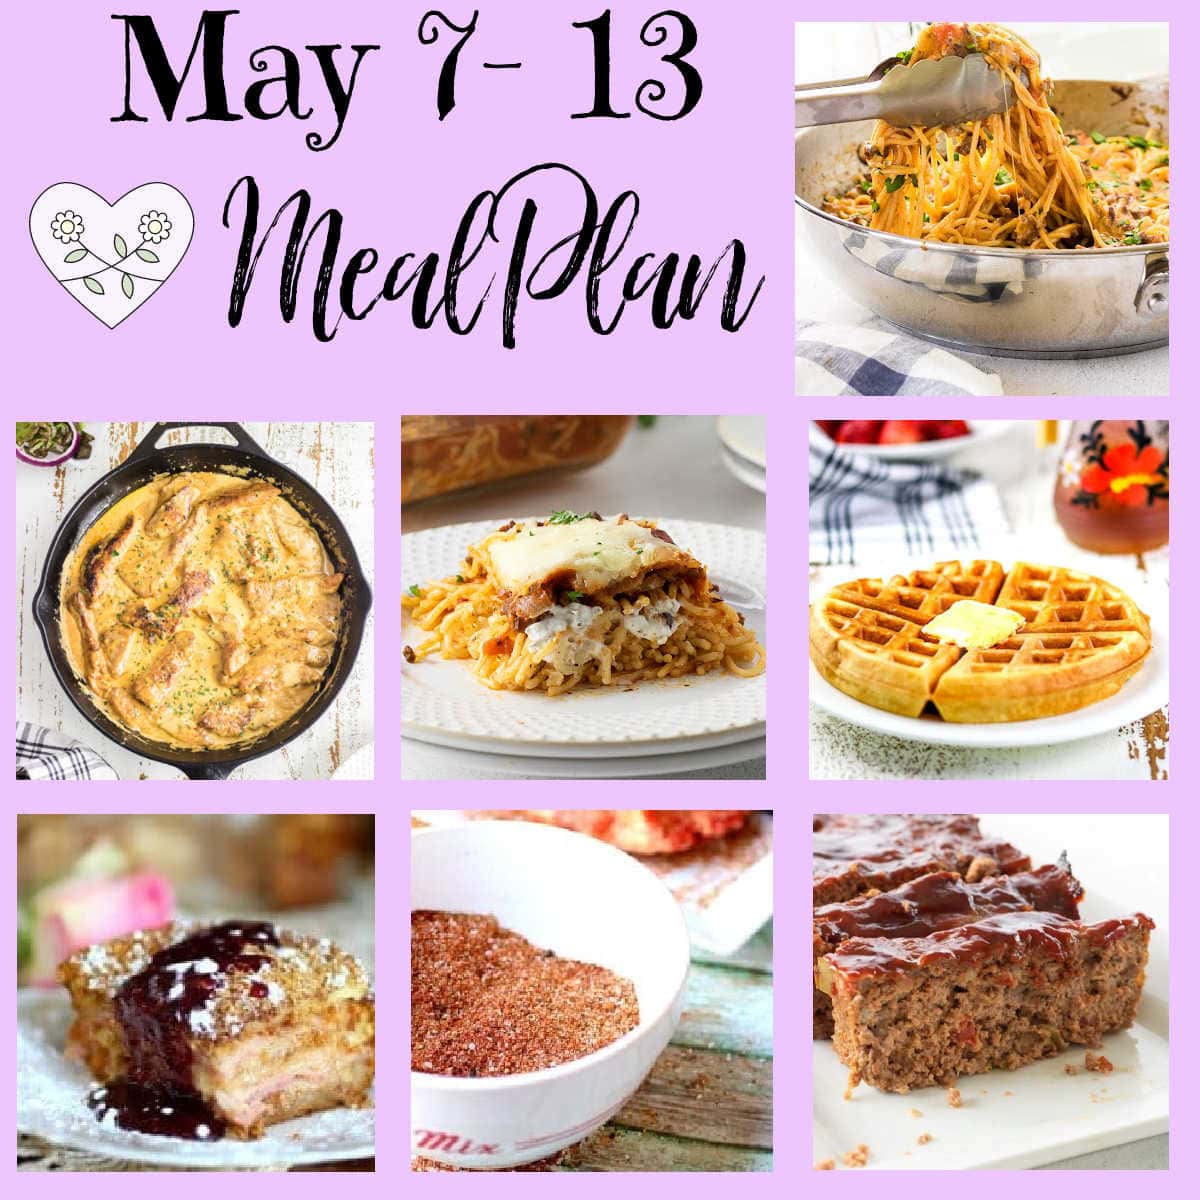 Collage of images from meal plan 20.